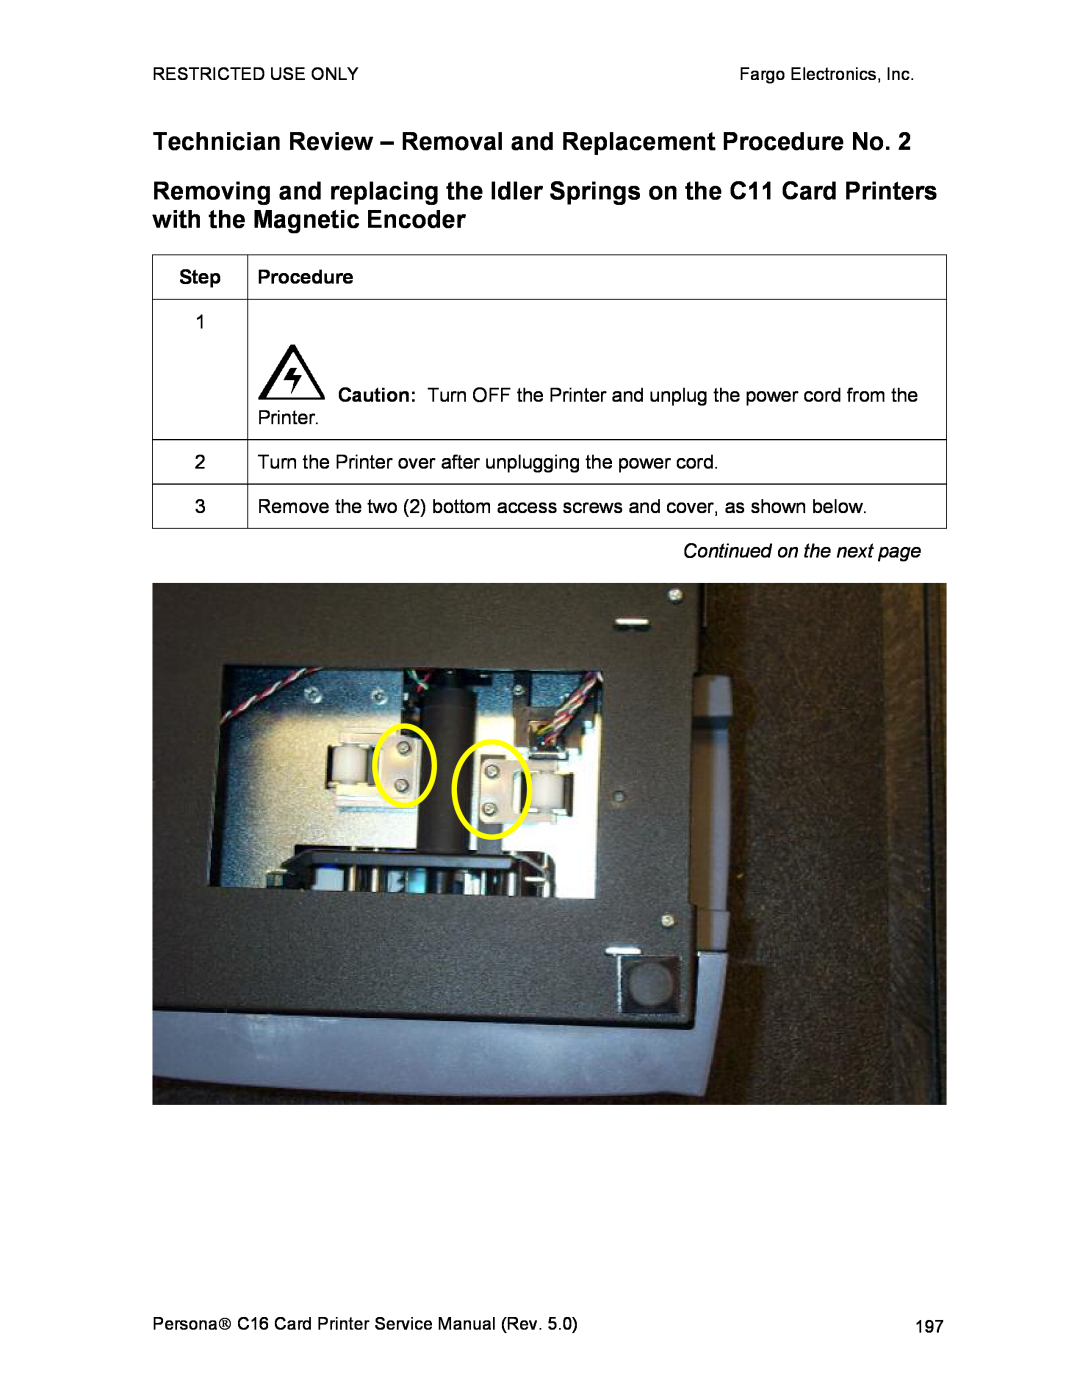 FARGO electronic C16 service manual Technician Review - Removal and Replacement Procedure No, Step 